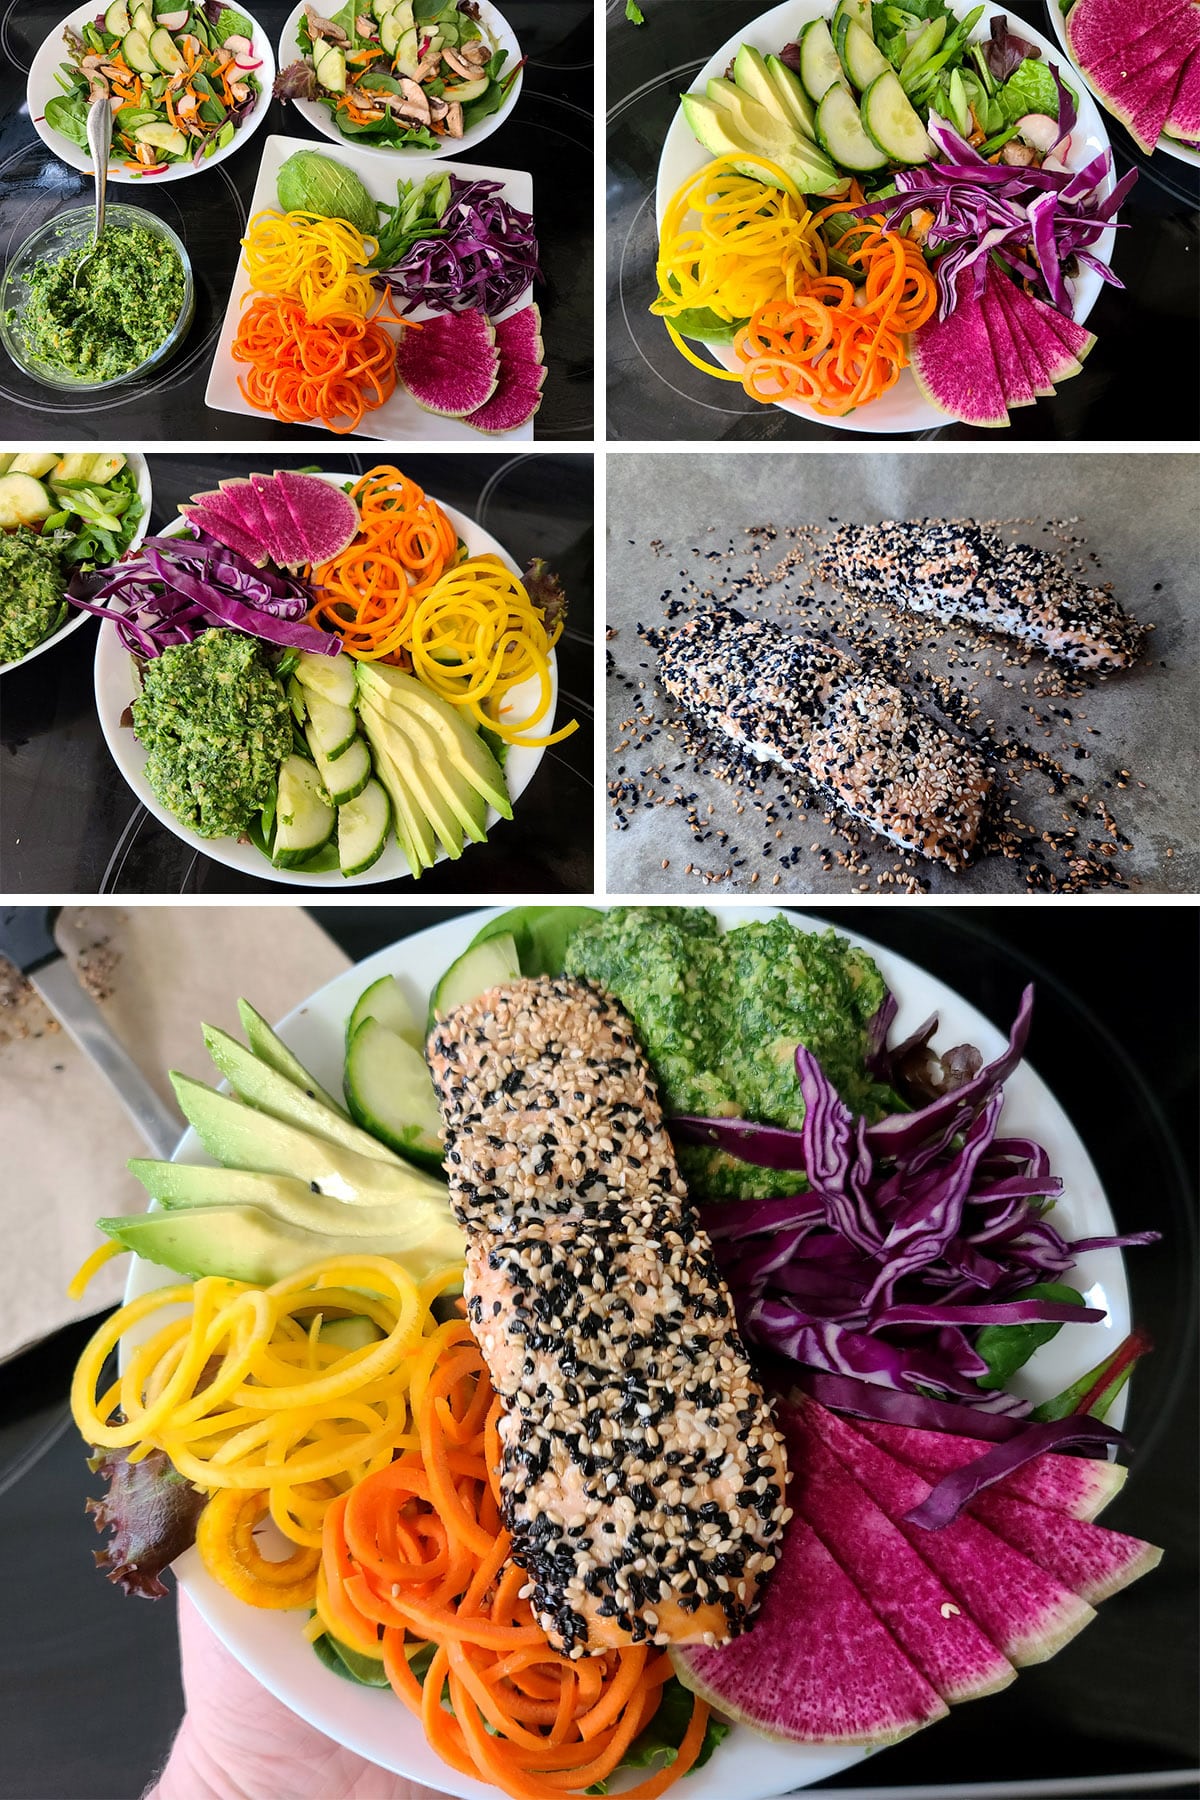 A 5 part image showing the rainbow of vegetable toppings being arranged on a base salad and topped with a baked sesame crusted salmon filet.